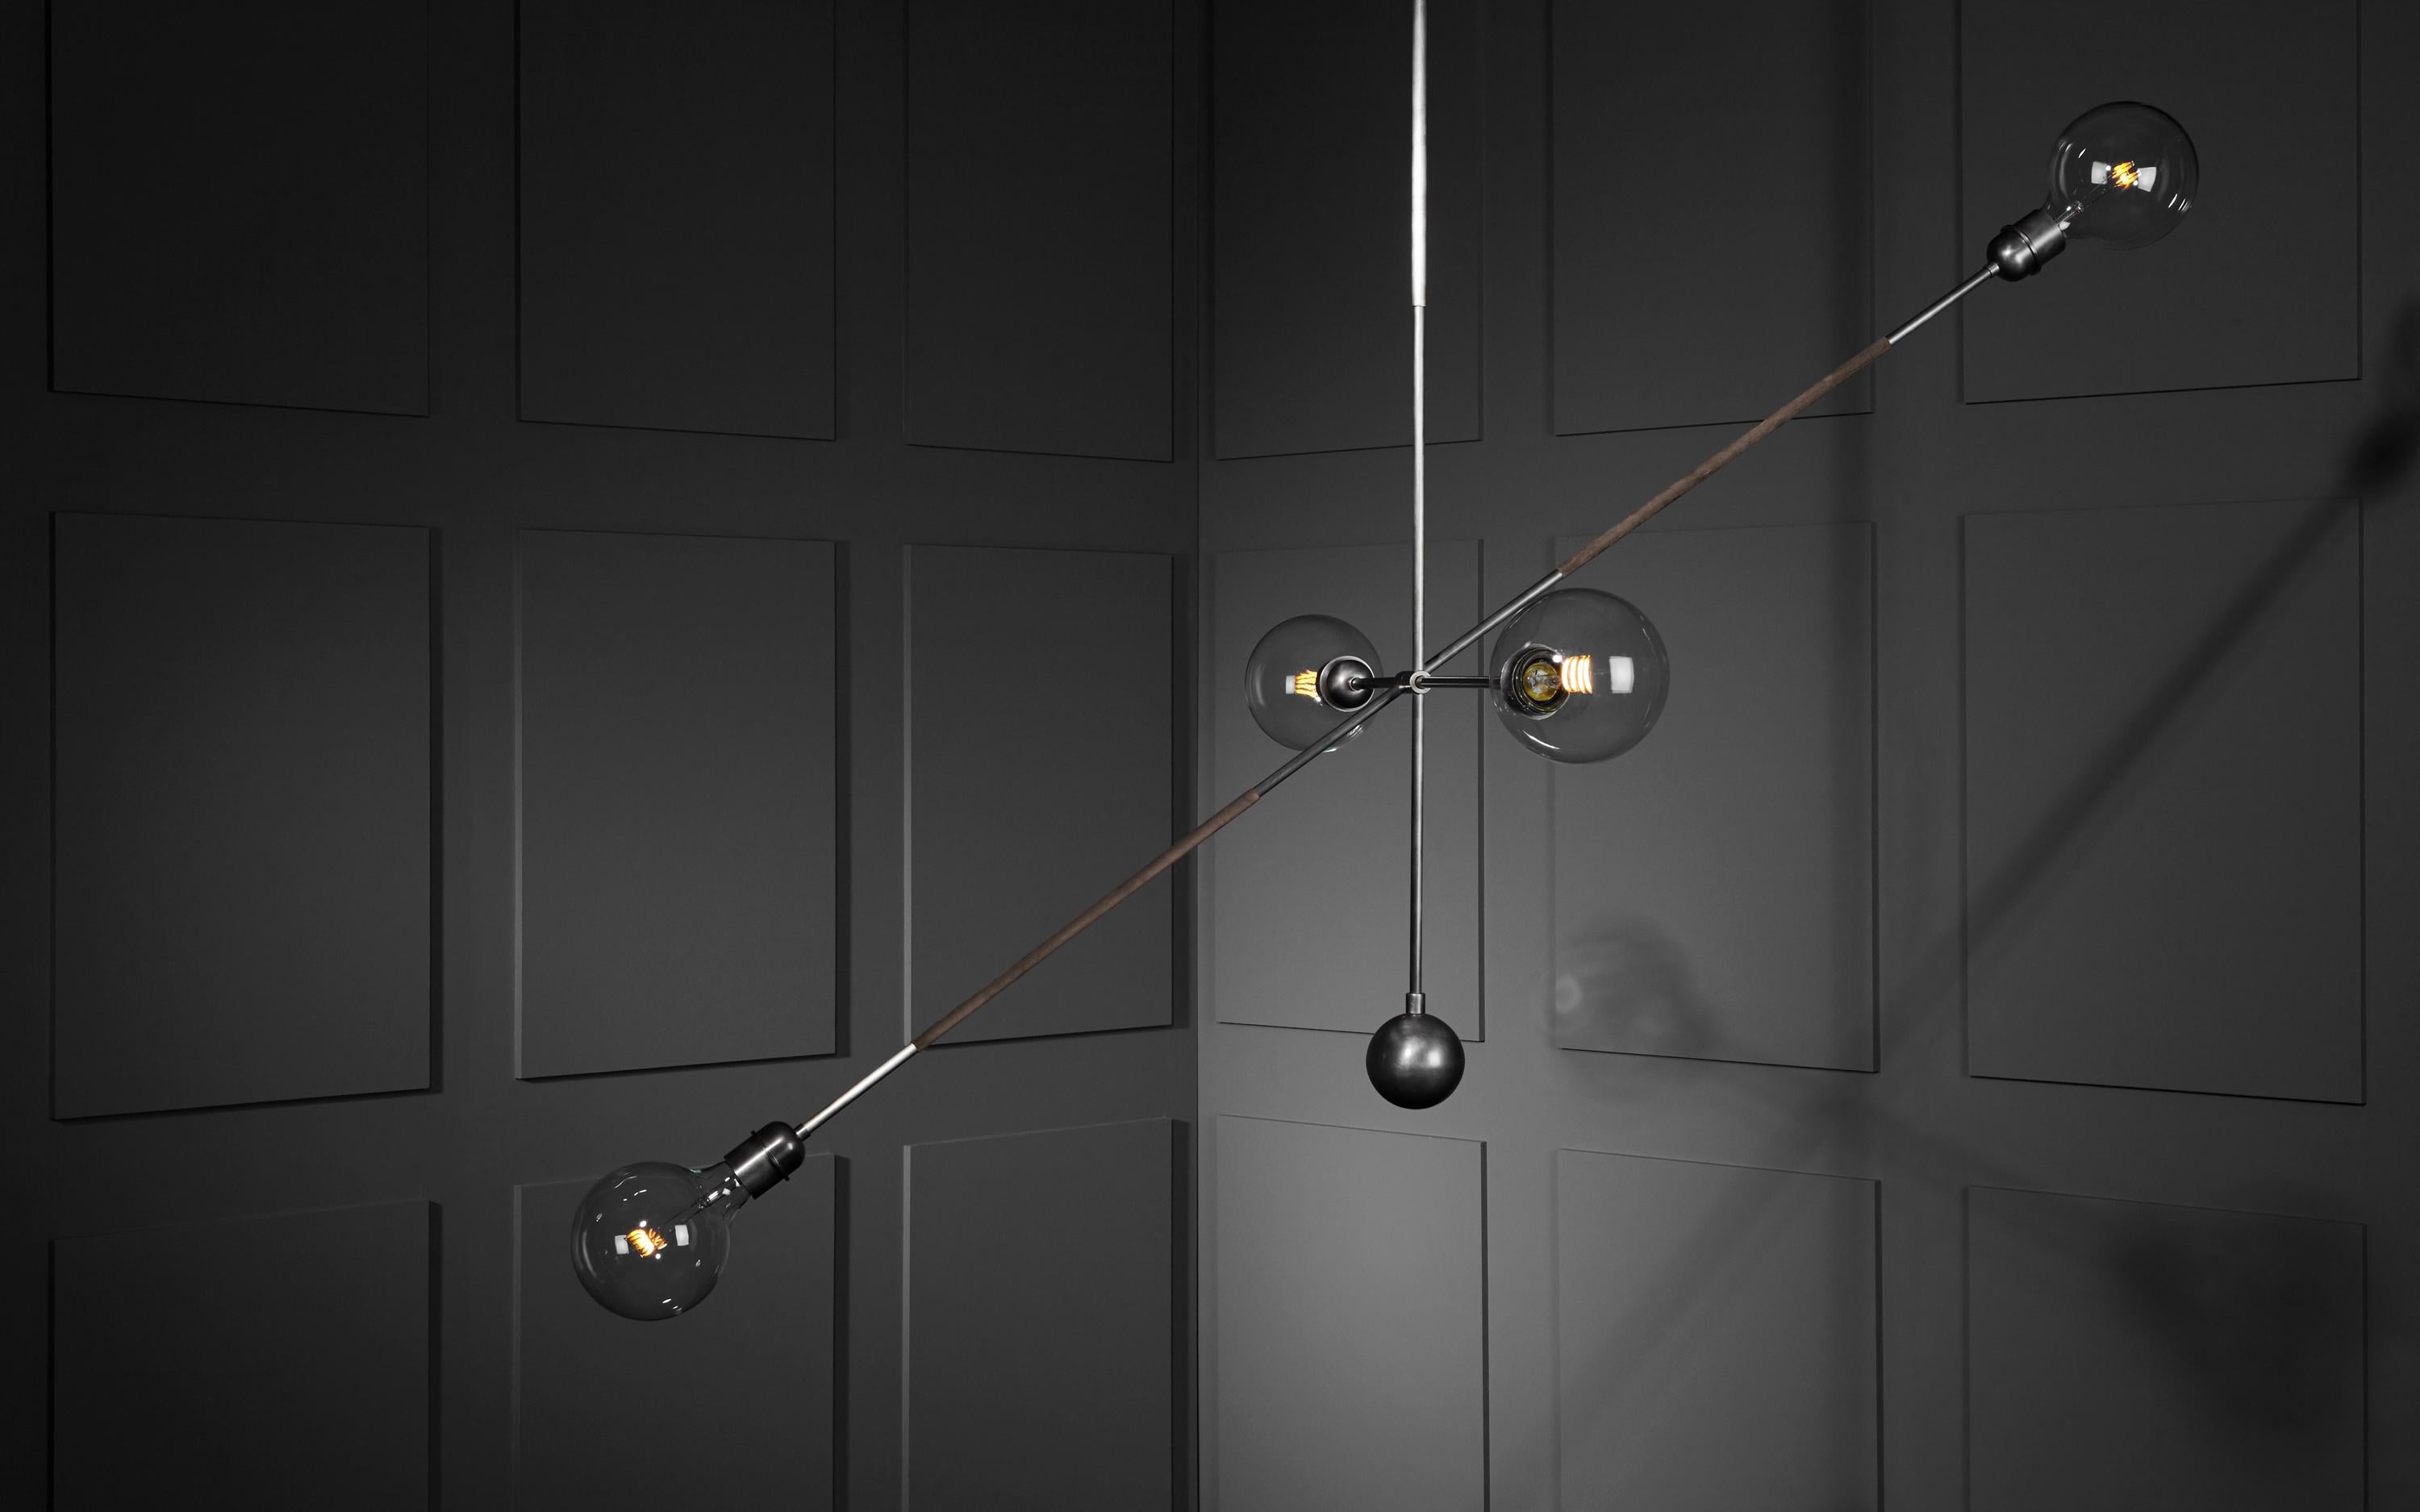 The Highwire pendant Light by APPARATUS STUDIO is inspired by the silhouette of famed French aerialist Philippe Petit on his wire against the Manhattan skyline. The “balance bar” is wrapped in leather or suede and can be tilted along its